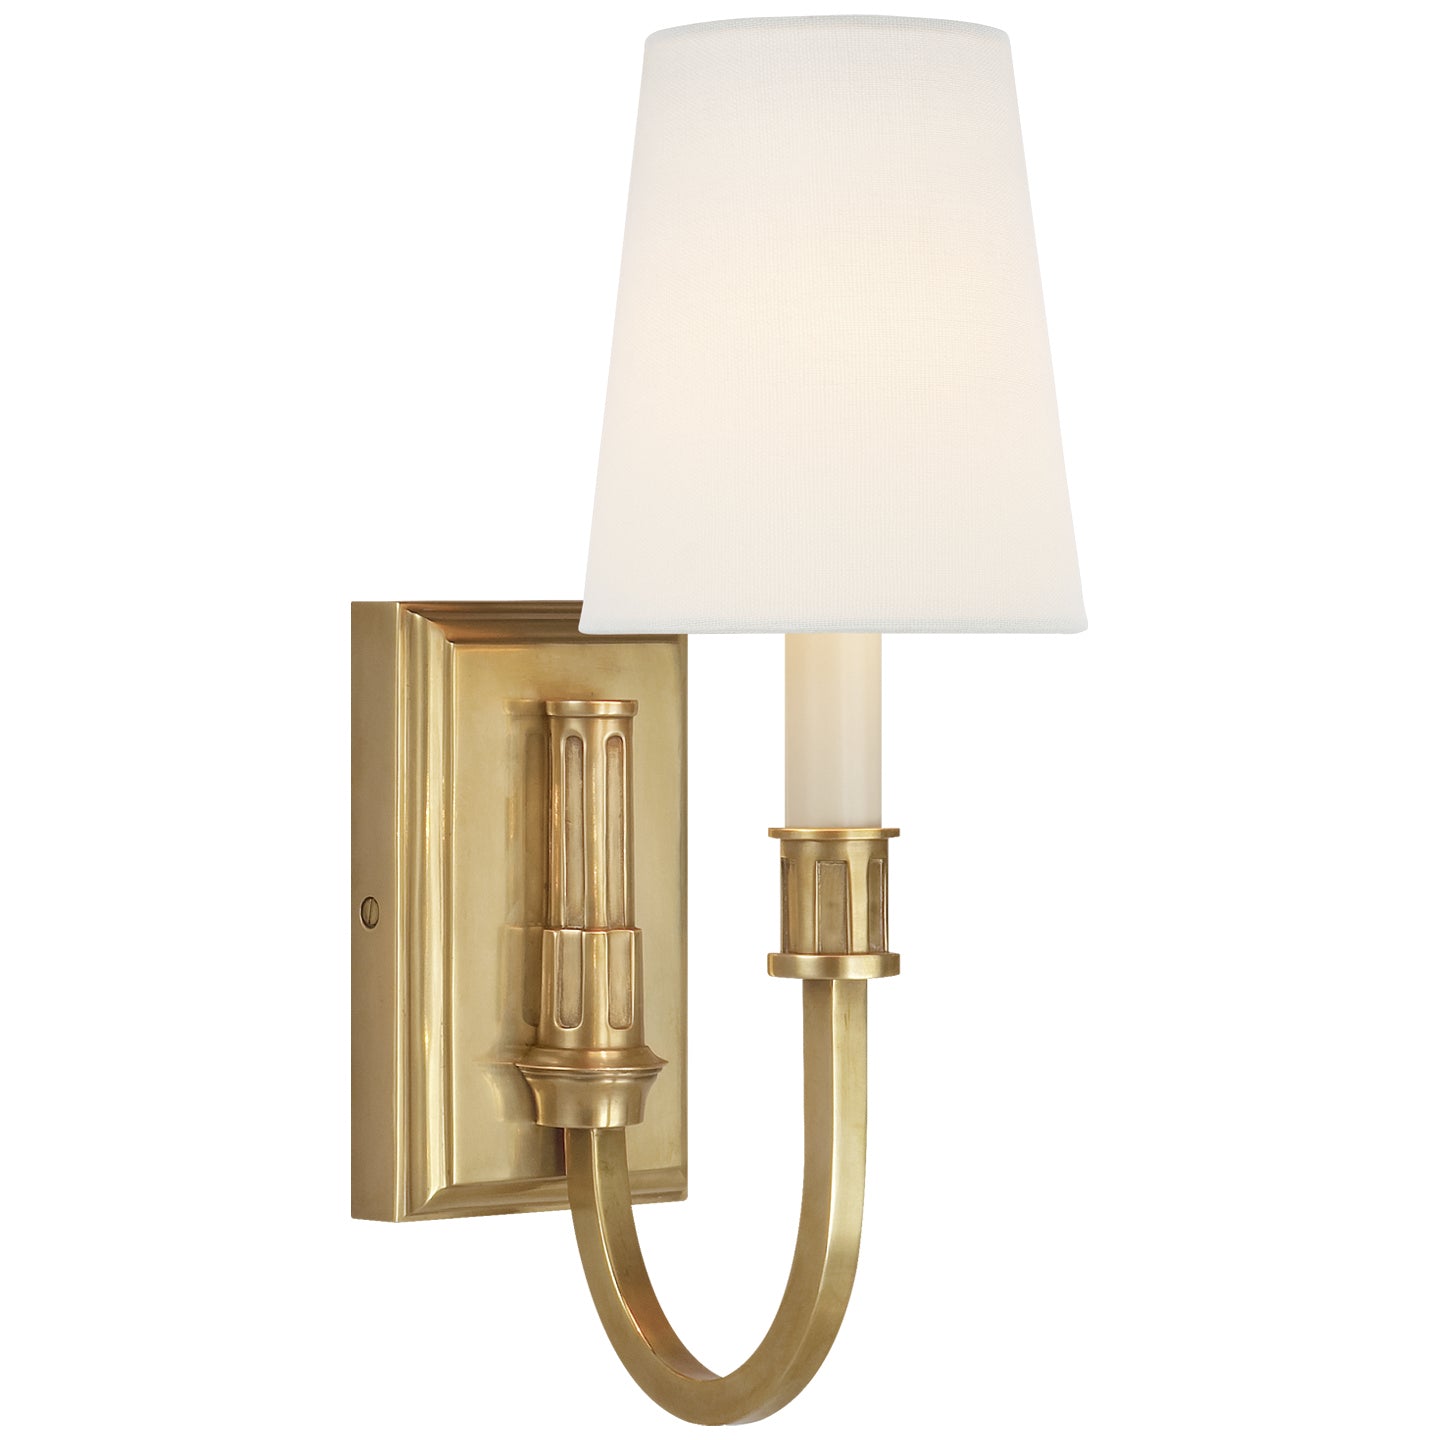 Visual Comfort Signature - TOB 2327HAB-L - One Light Wall Sconce - Modern Library - Hand-Rubbed Antique Brass